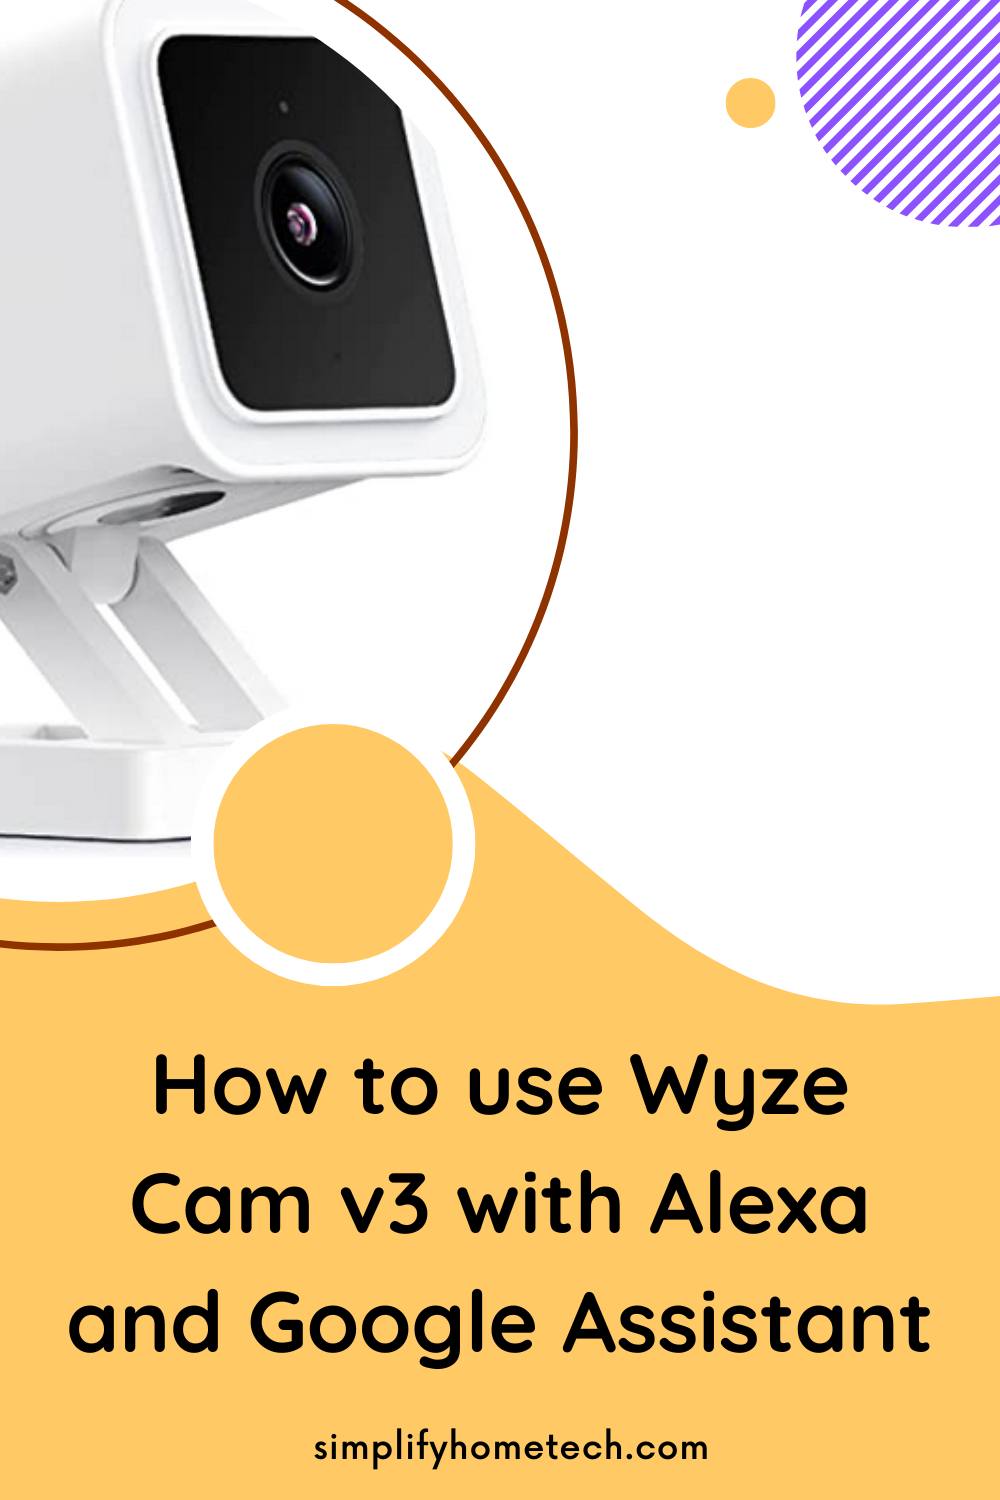 How to Use Wyze Cam v3 with Alexa and Google Assistant?